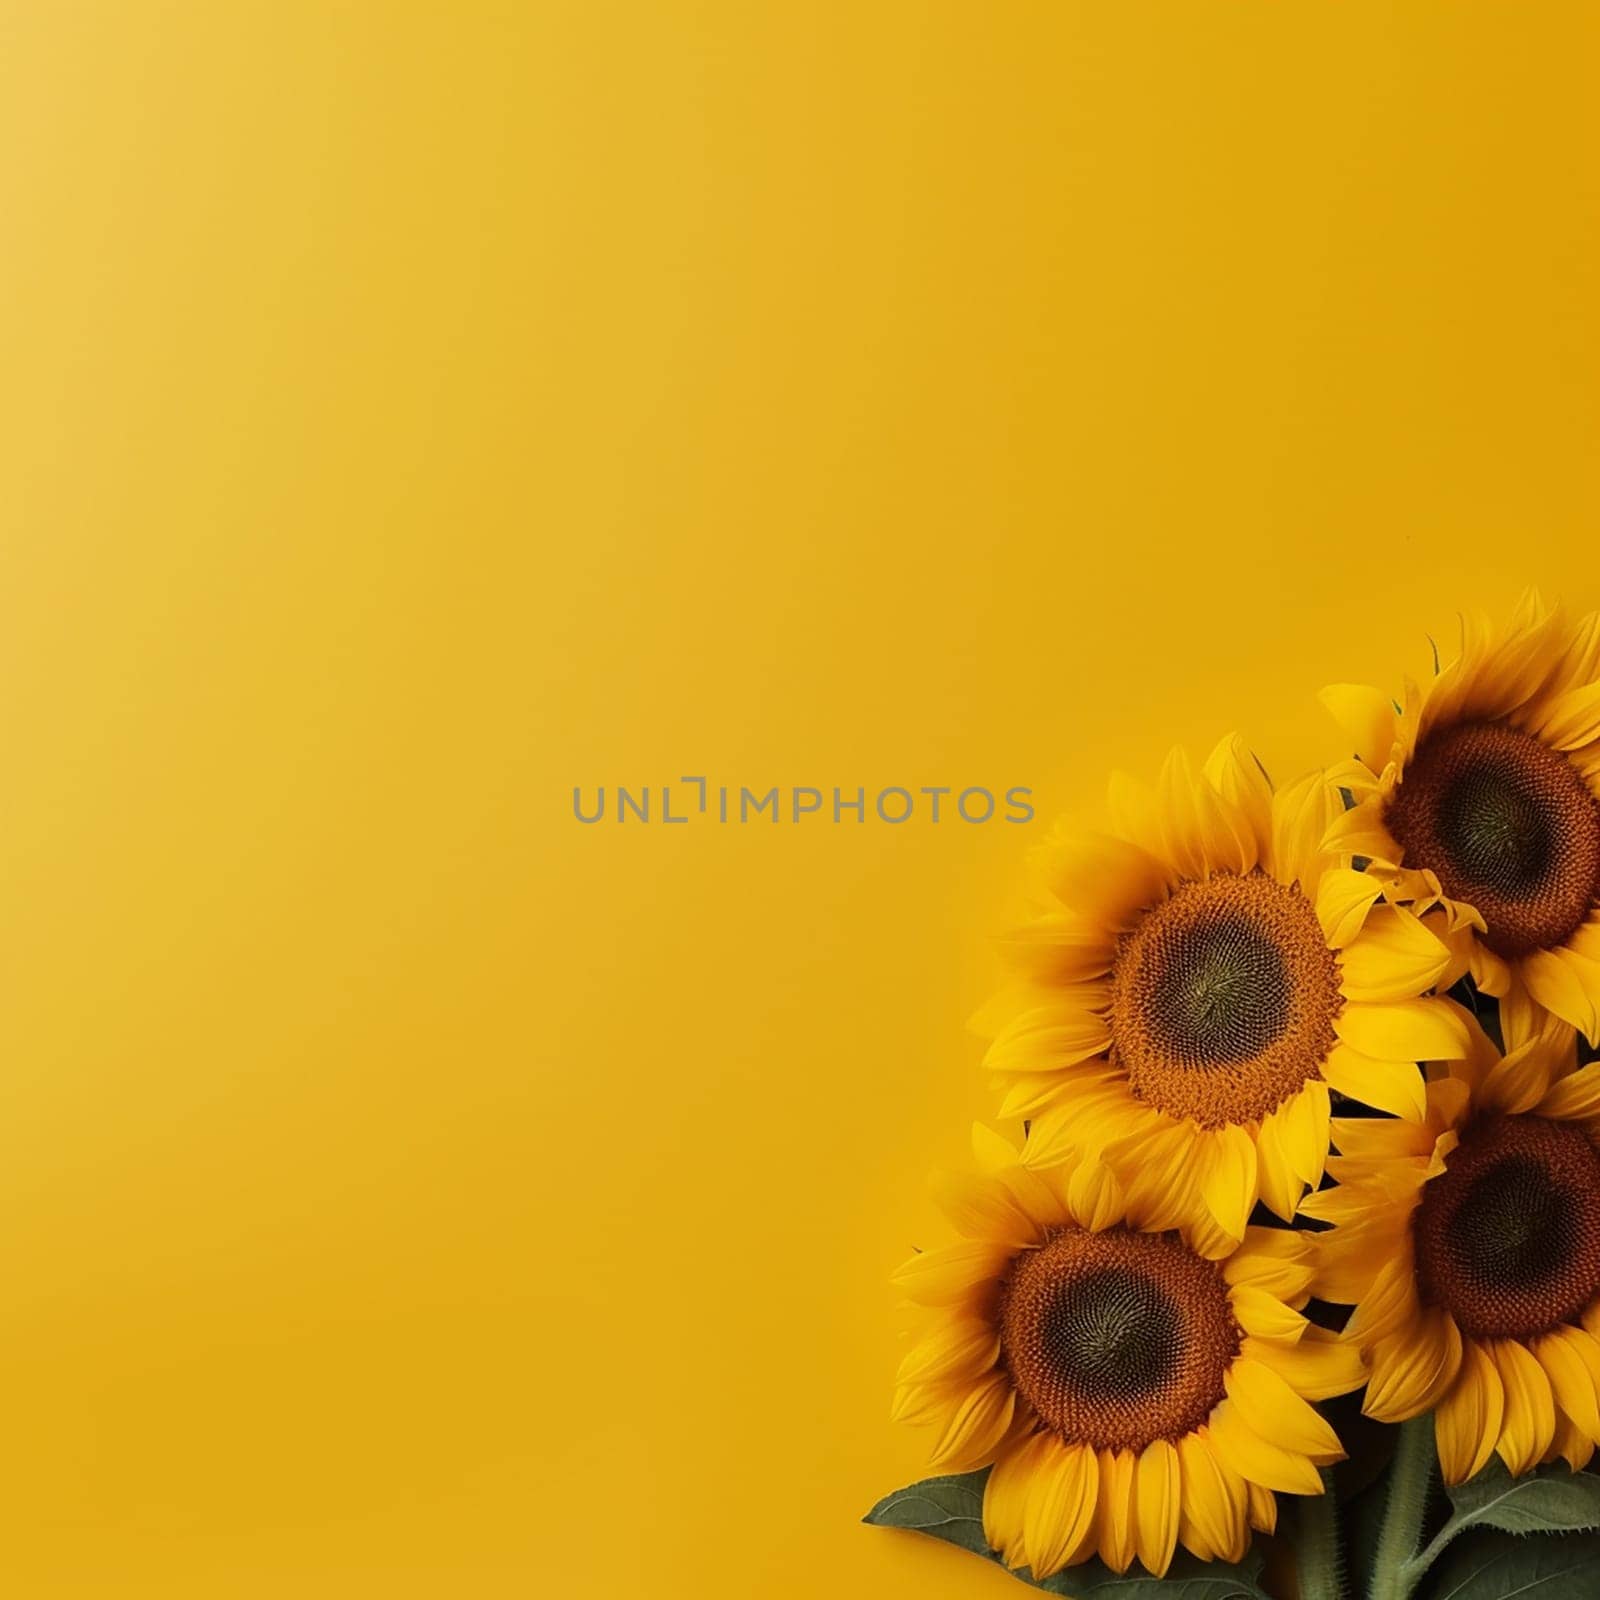 Bunch of sunflowers against a vibrant yellow background. by Hype2art